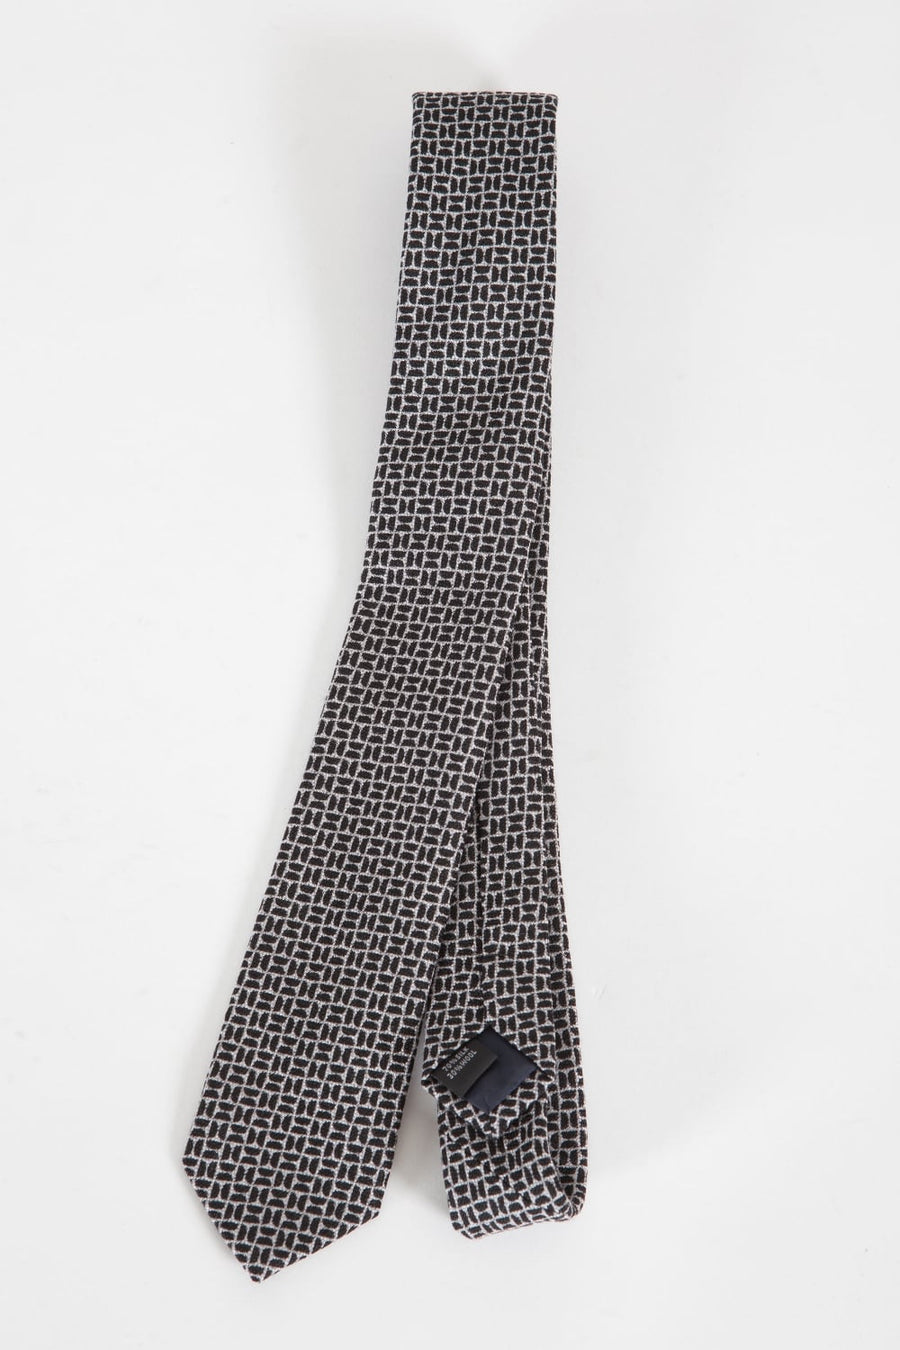 Buy the Remus Uomo Narrow Tie Grey/Black at Intro. Spend £50 for free UK delivery. Official stockists. We ship worldwide.